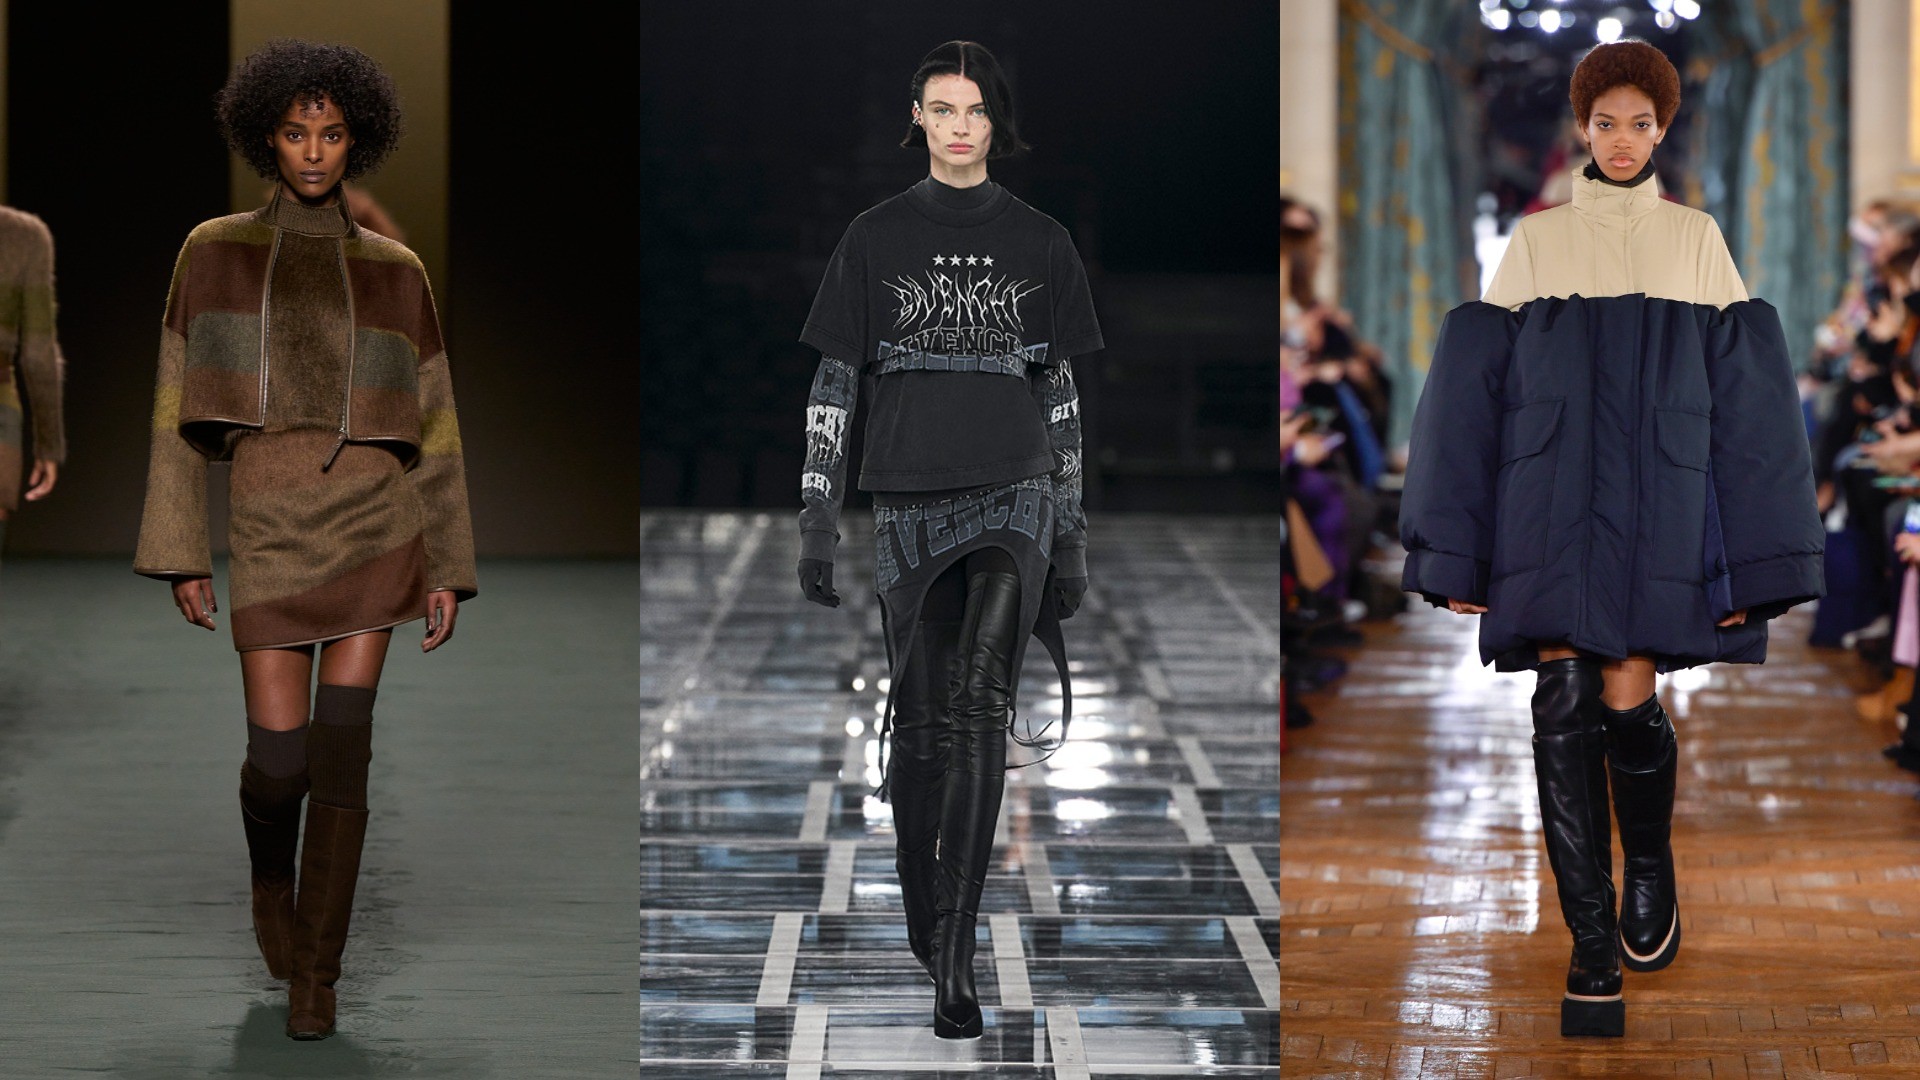 4 women's fashion trends for 2023 seen in menswear runway shows, from  layered knits to leather gloves, and how to style them at home